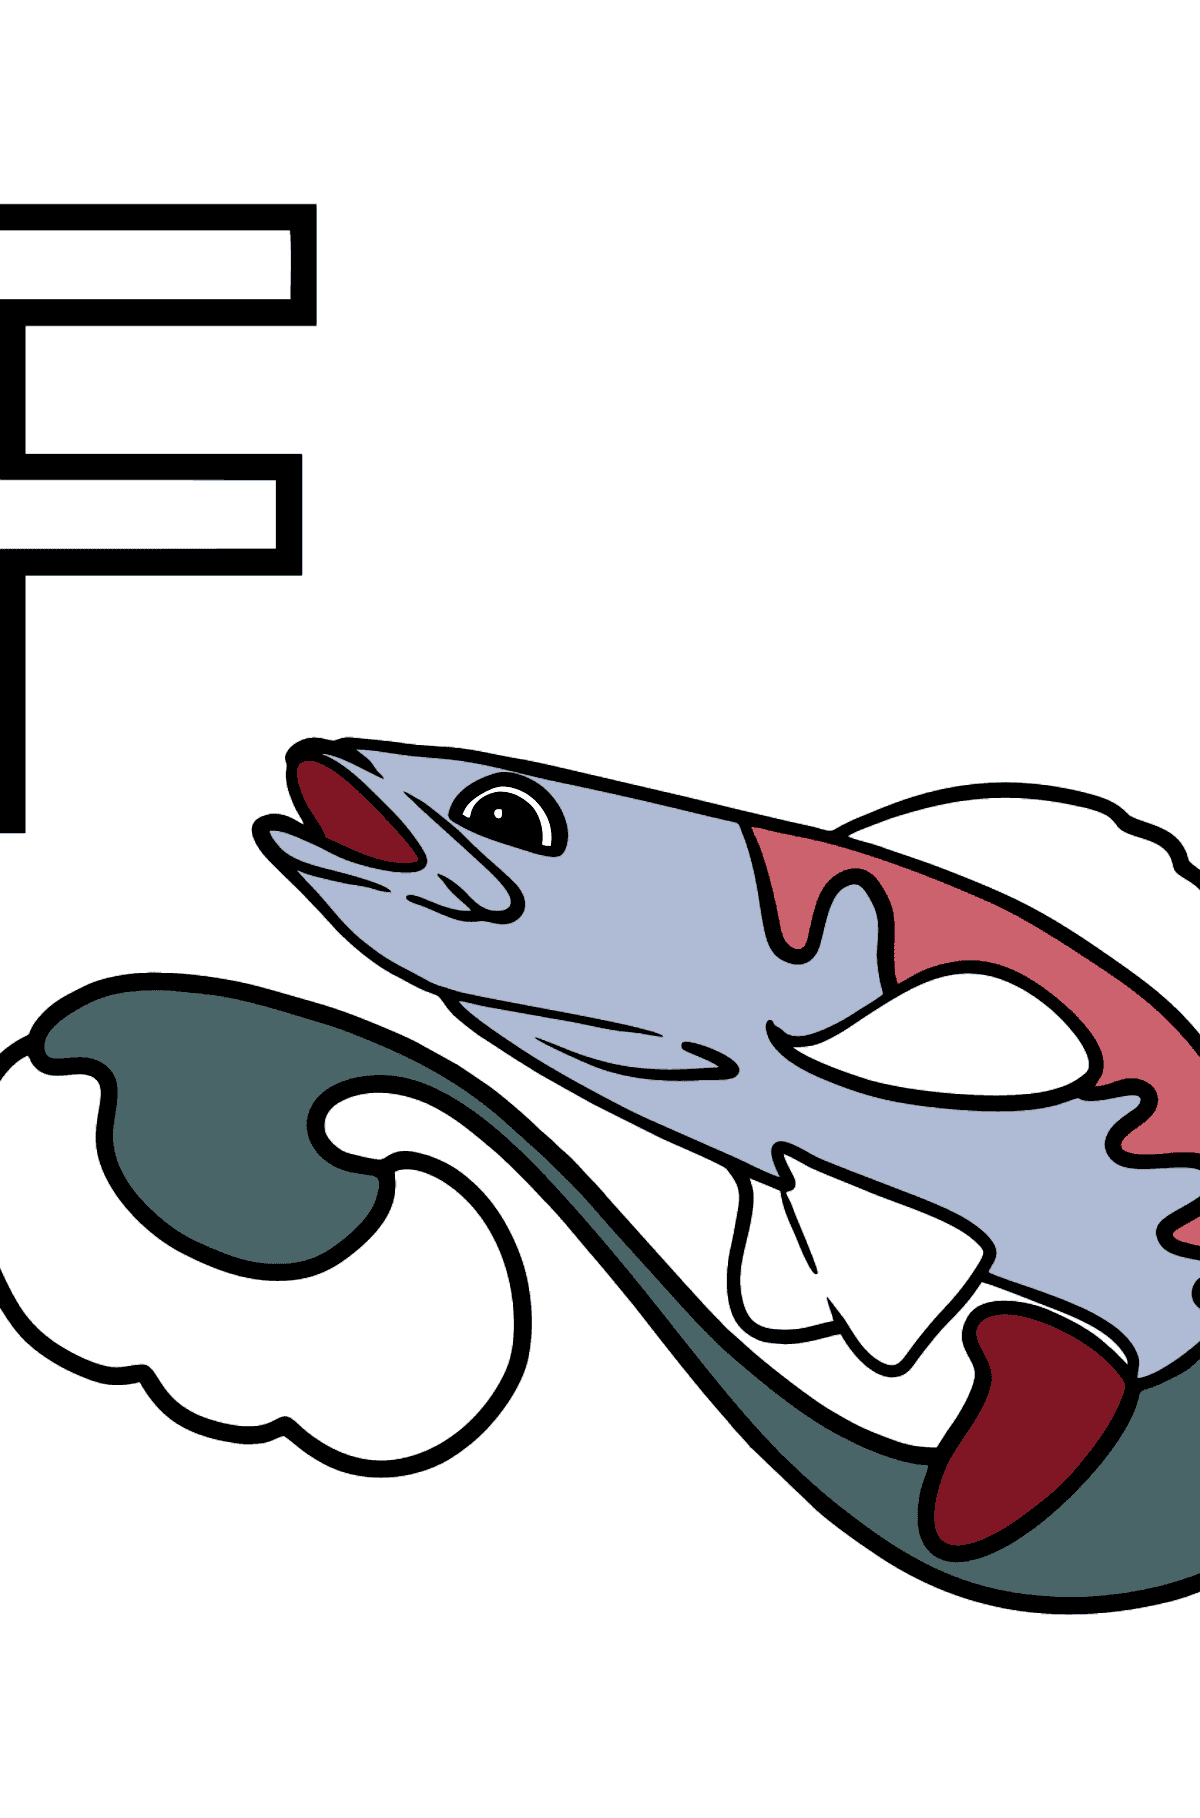 English Letter F coloring pages - FISH - Coloring Pages for Kids